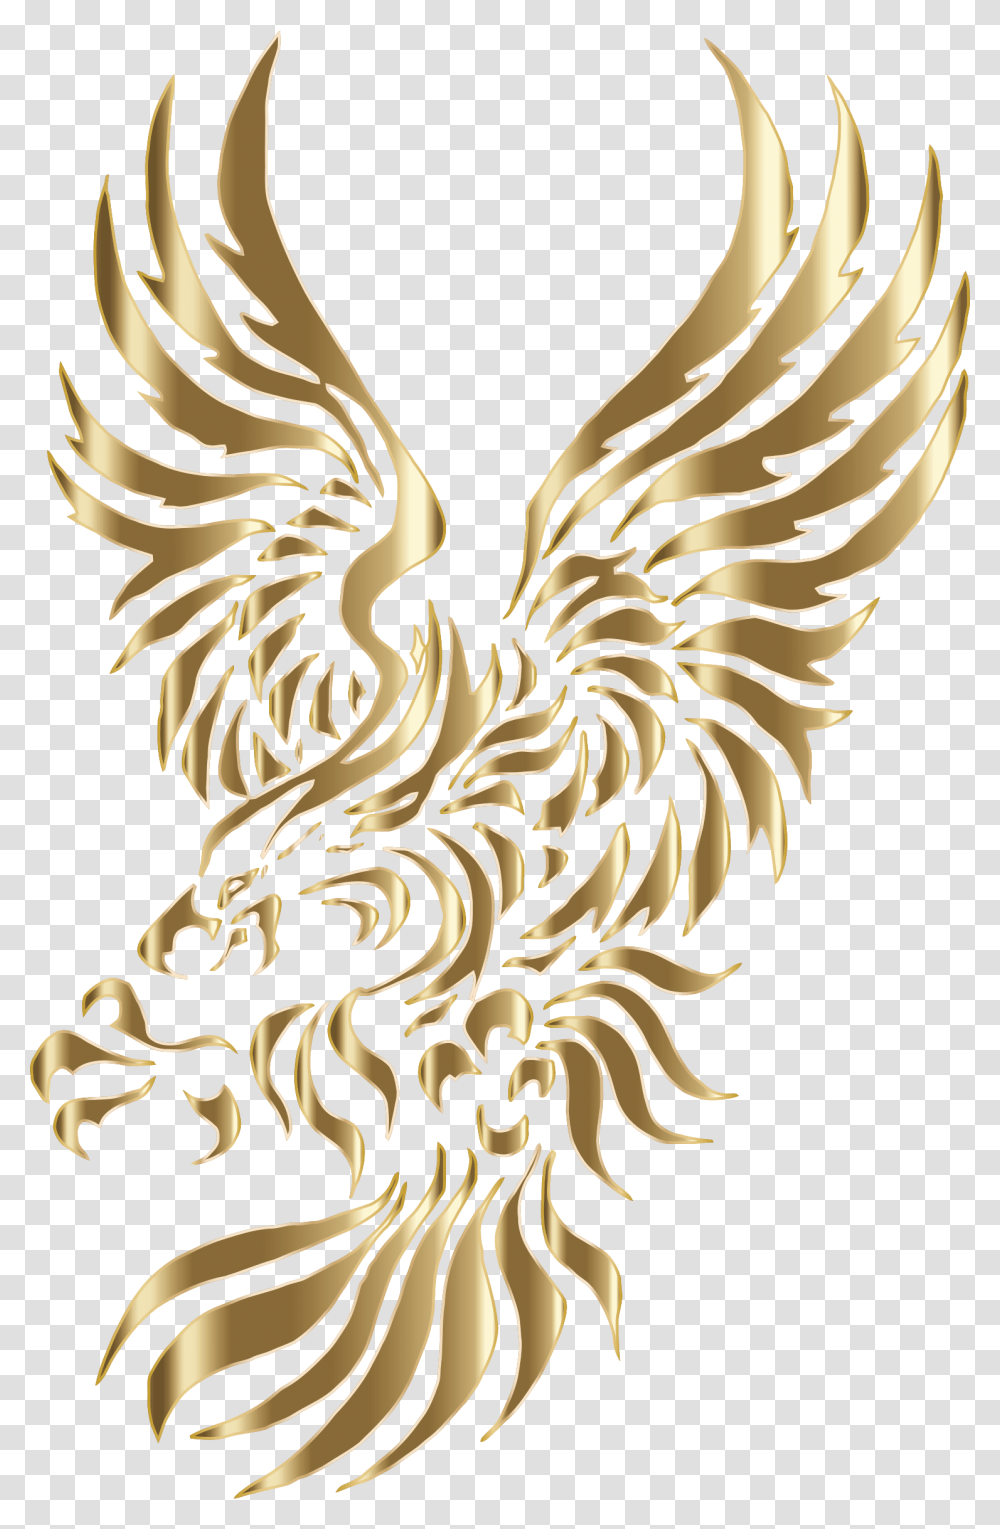 Bald Eagle Tribal Tattoo, Bird, Animal, Dragon, Poultry Transparent Png